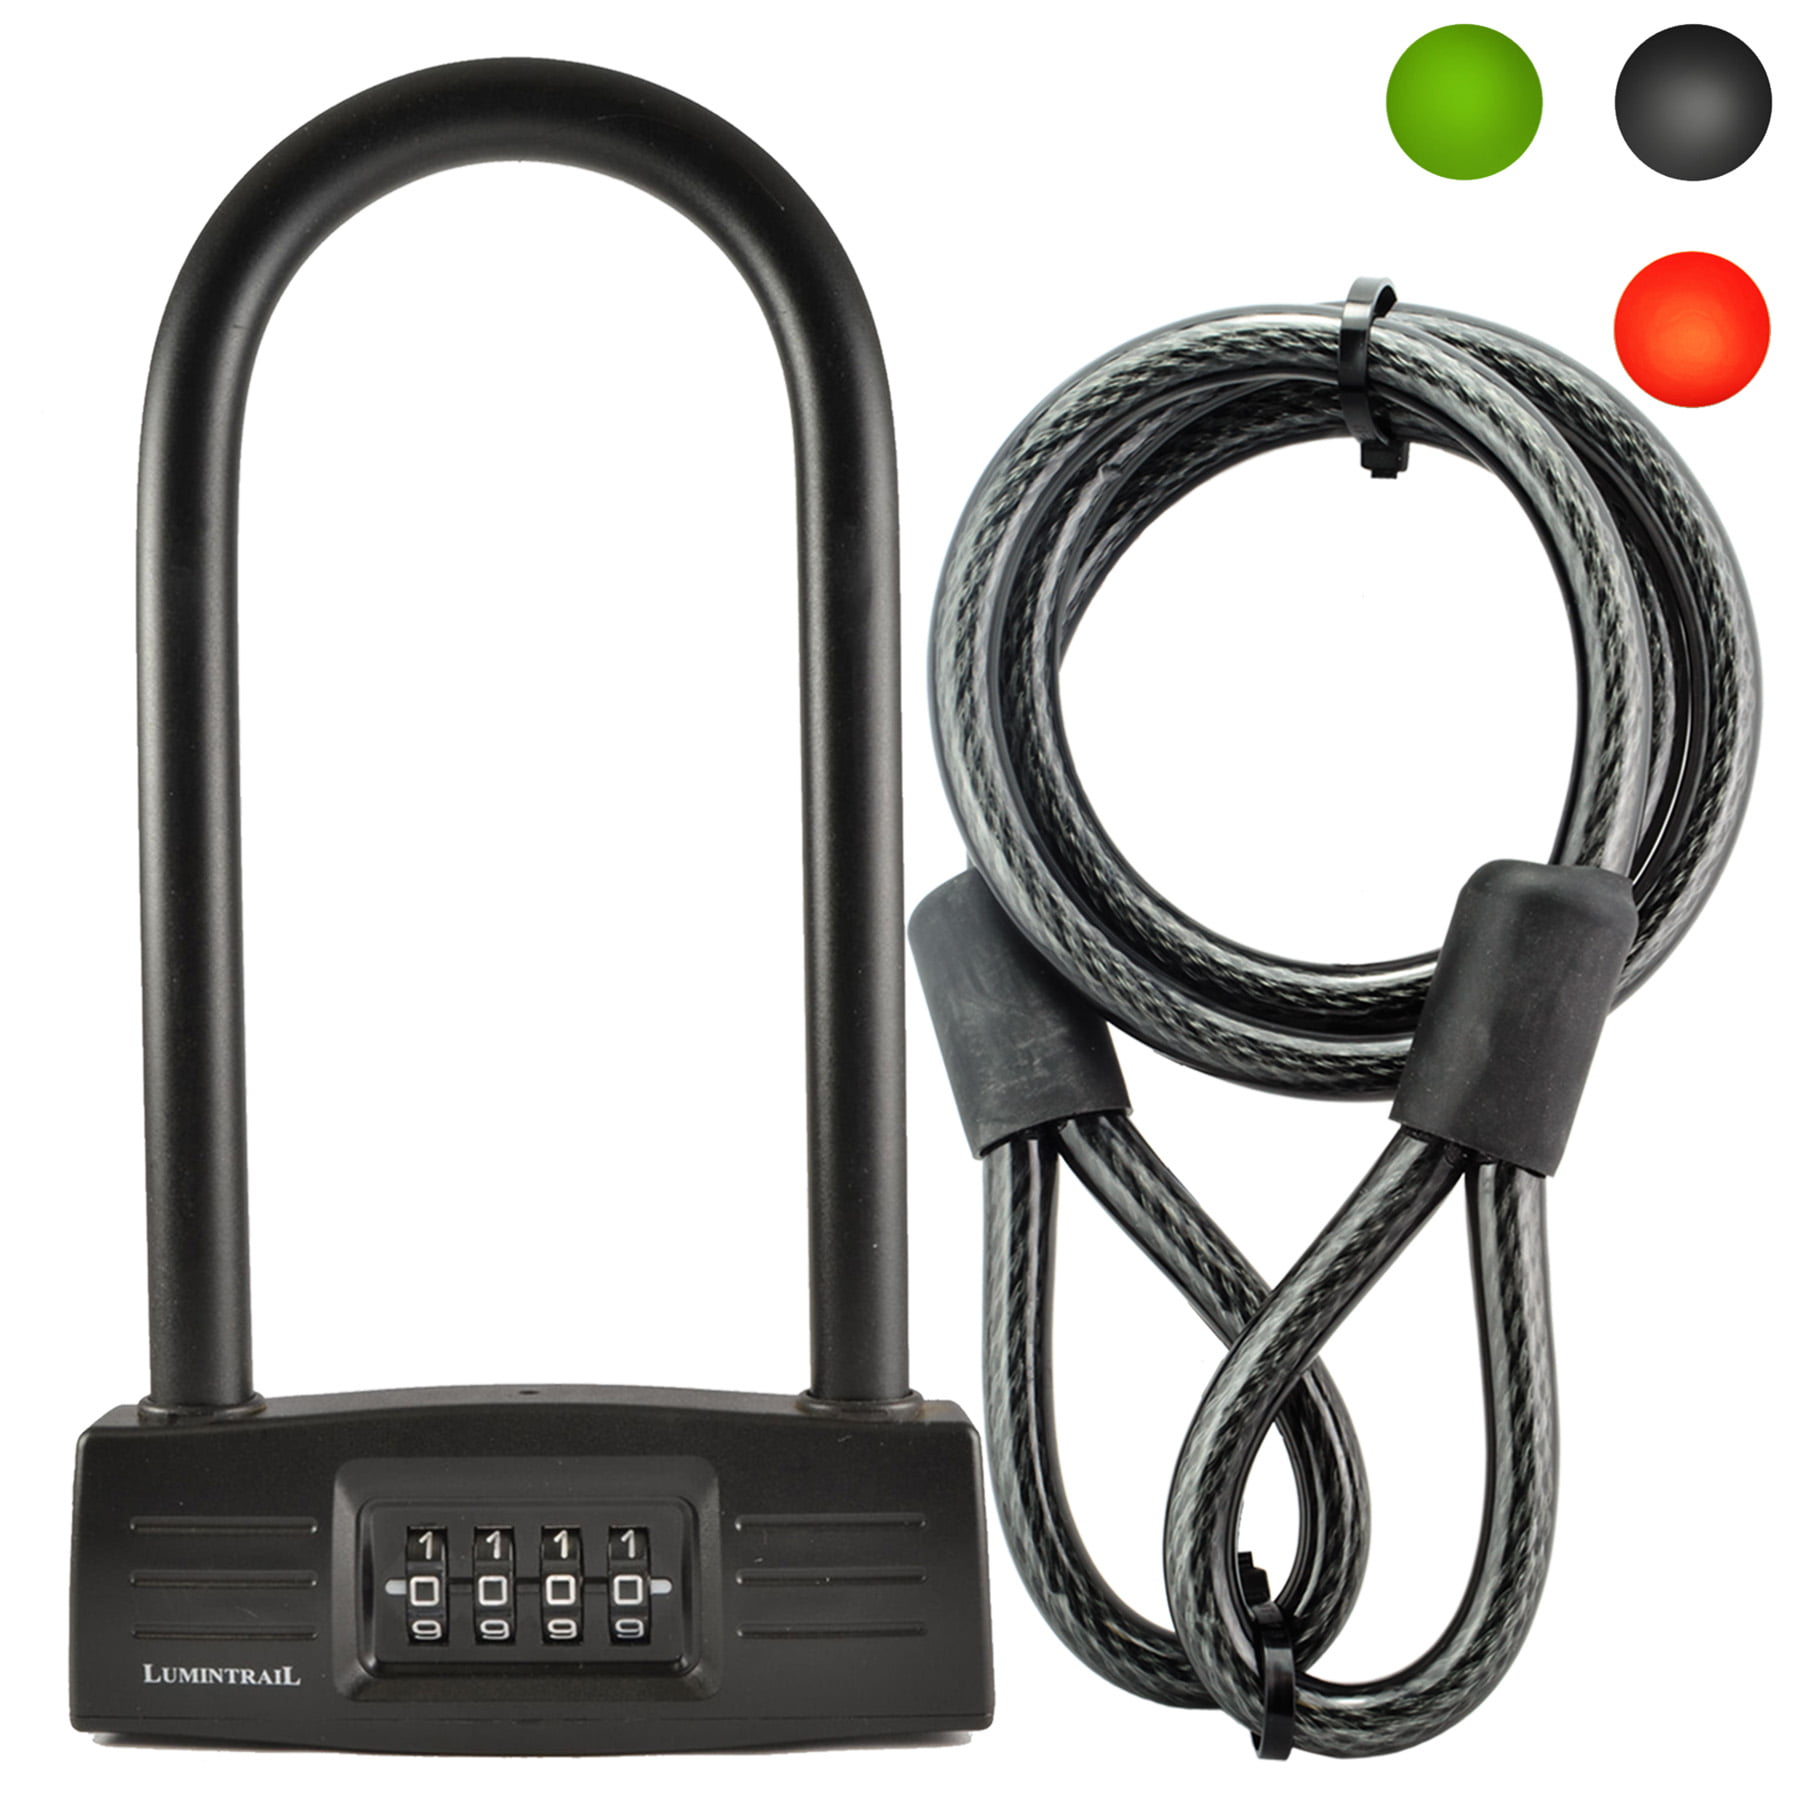 Lumintrail LK20708 Combination 14mm Bicycle U-Lock with Mounting Bracket and Optional 4-Foot Braided Steel Security Cable 